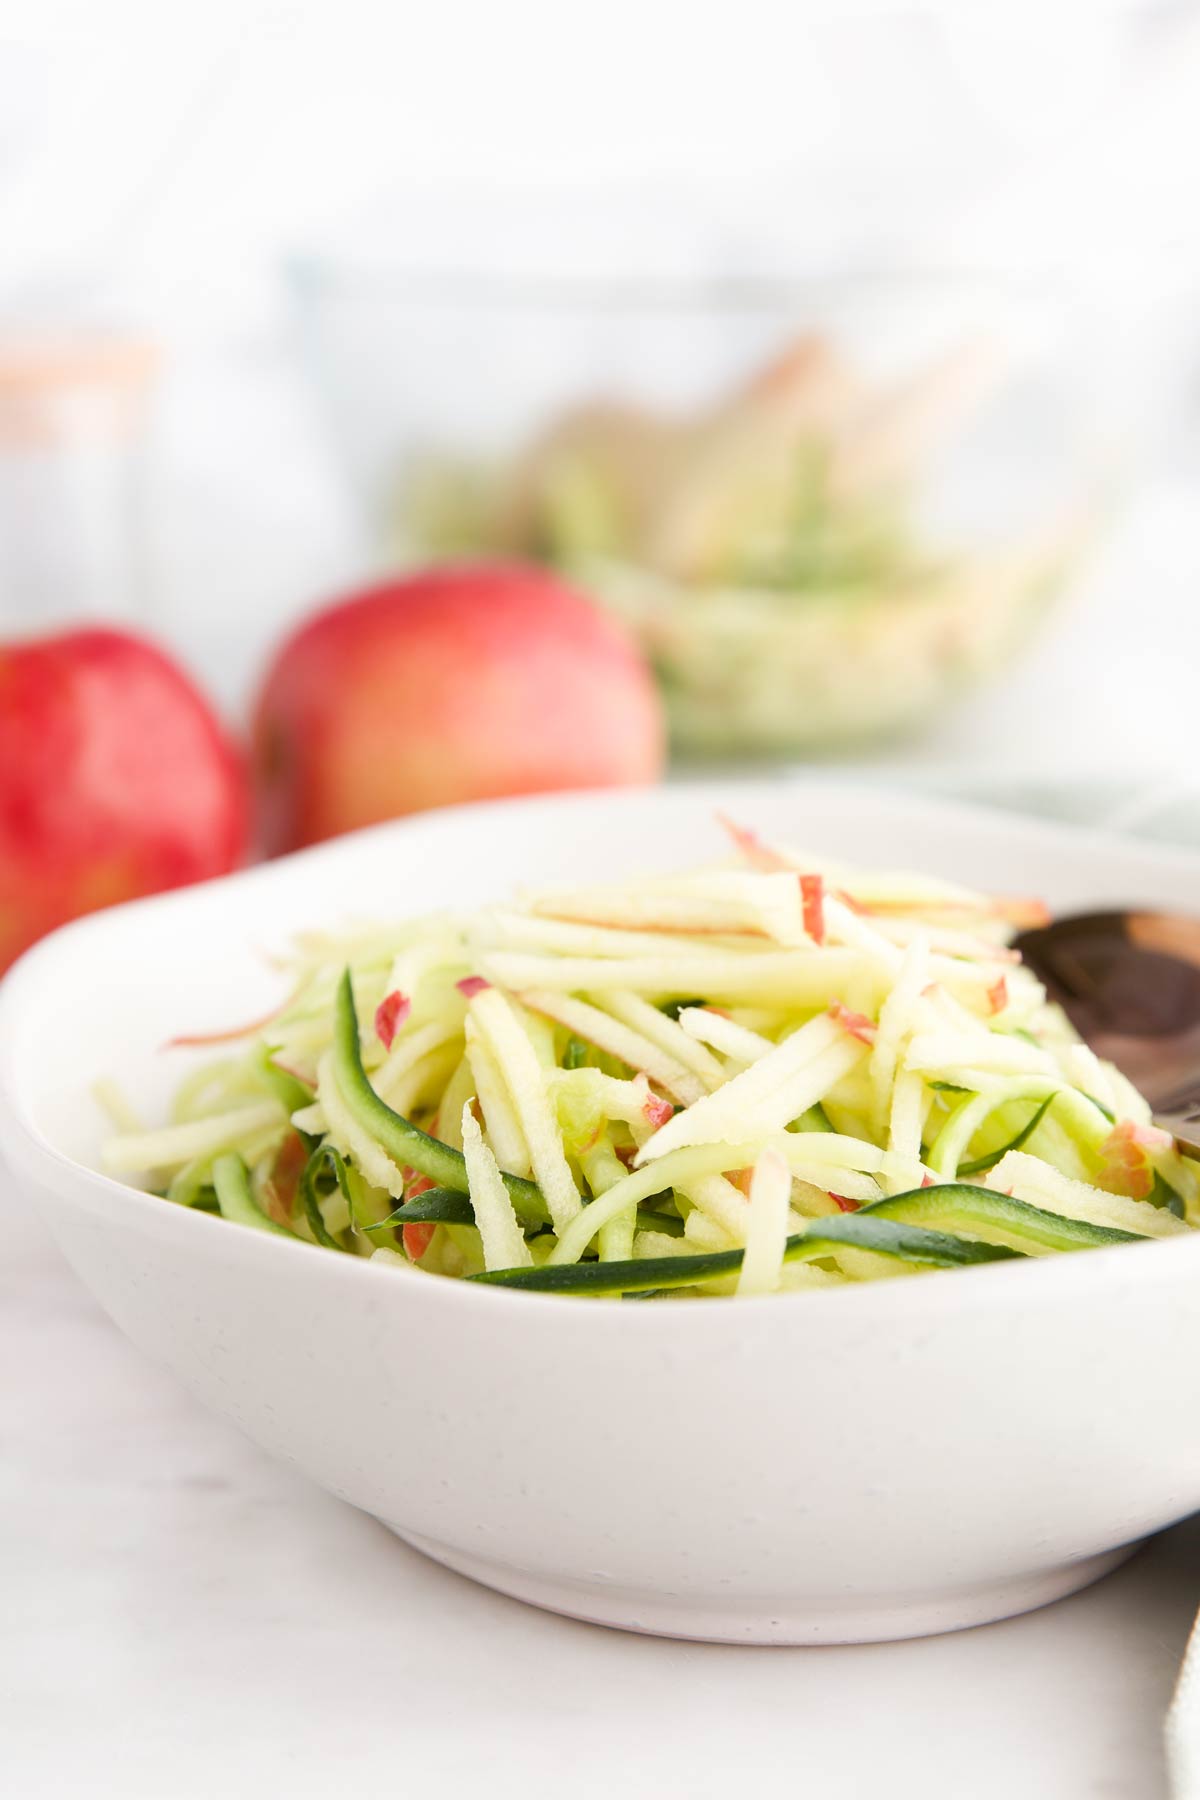 Apple Cucumber Salad in White Serving Bowl with Apples and Larger Bowl of Salad in Background